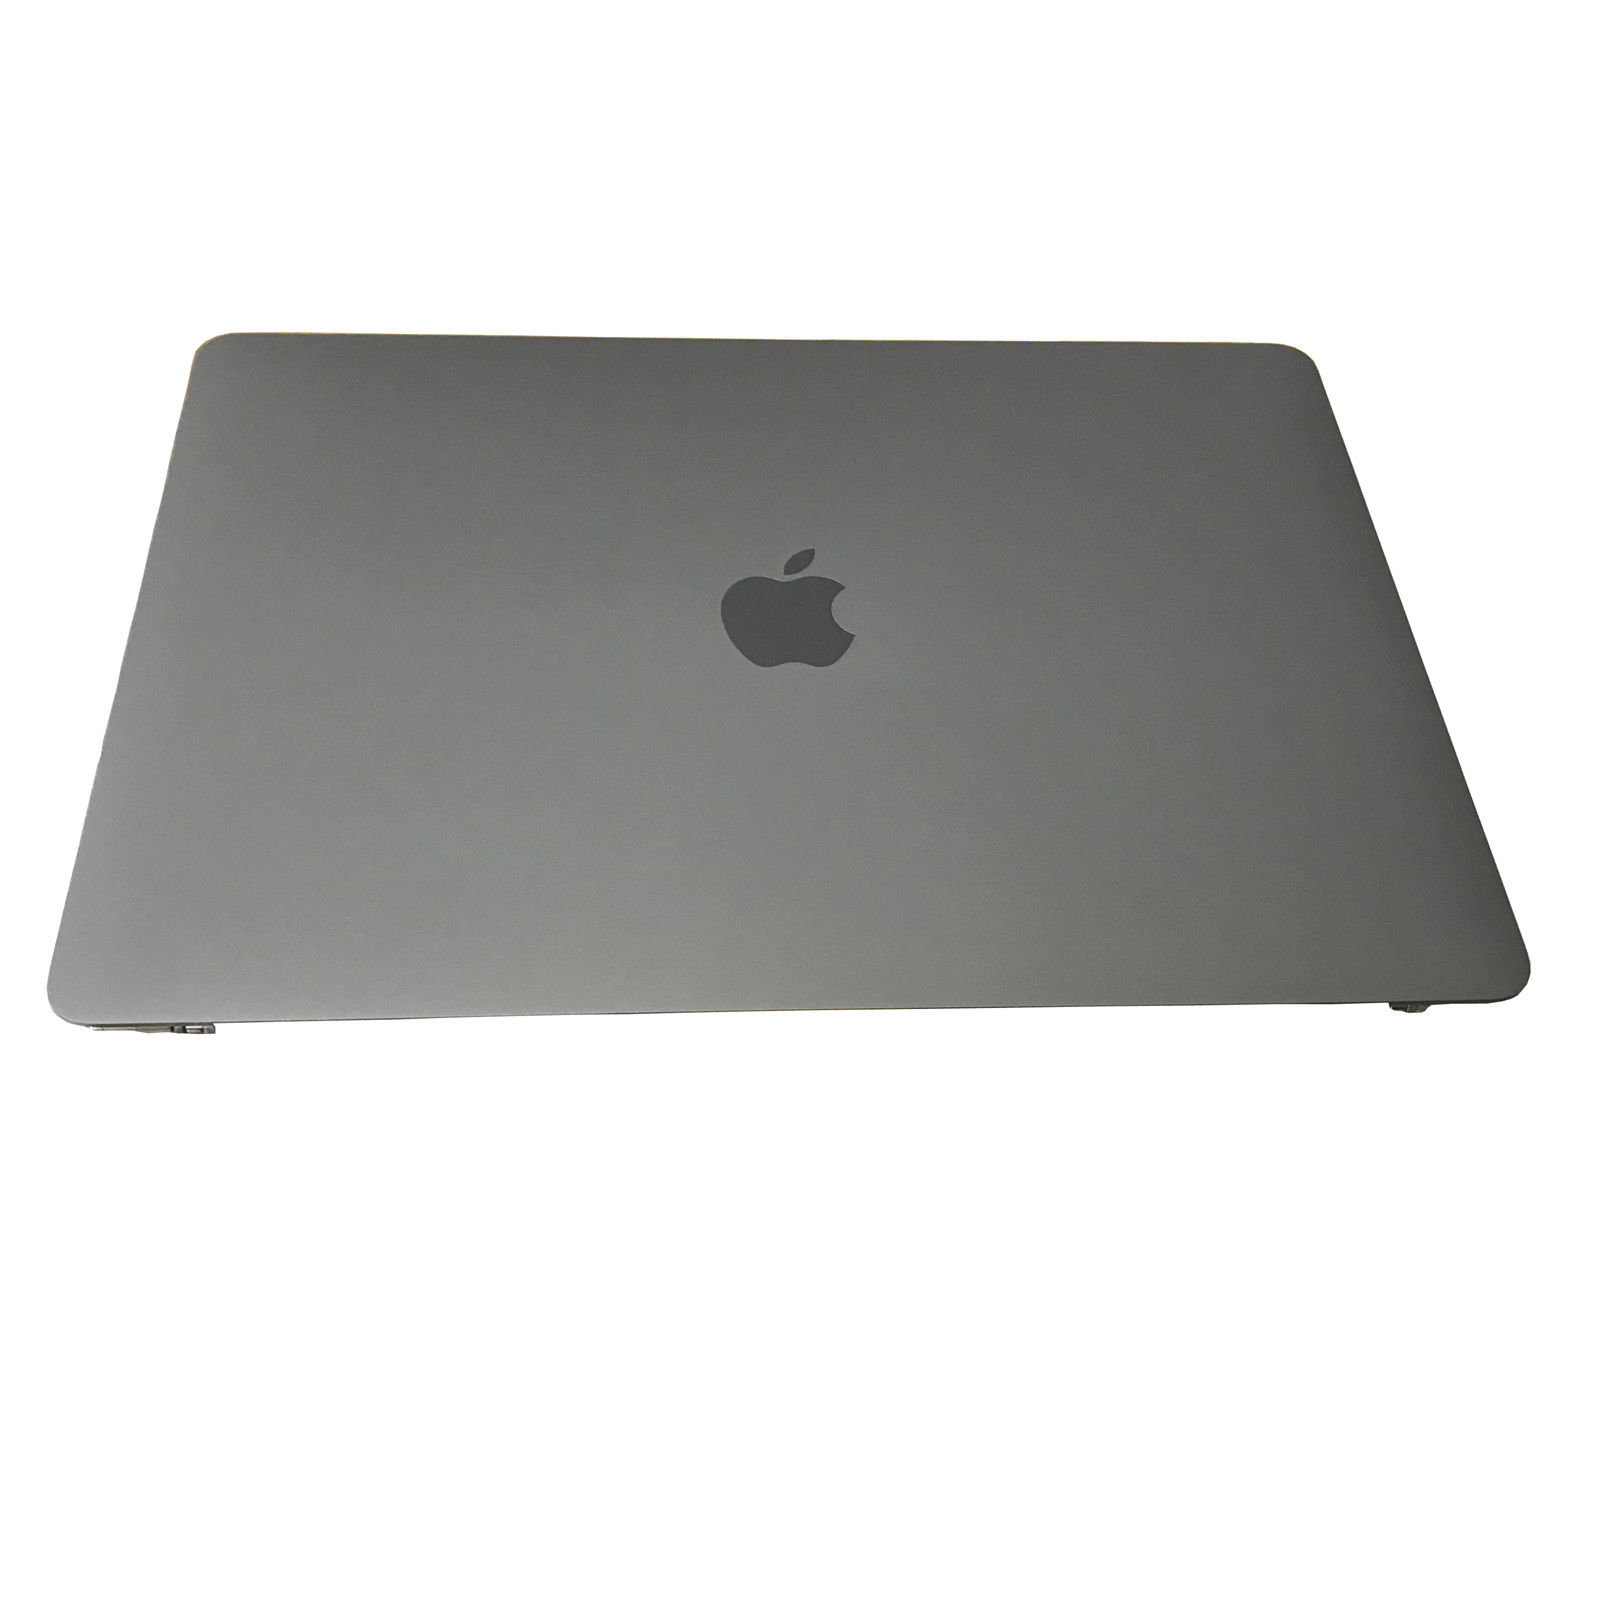 London MacBook Pro A1708 LCD Screen Replacement (13-inch)